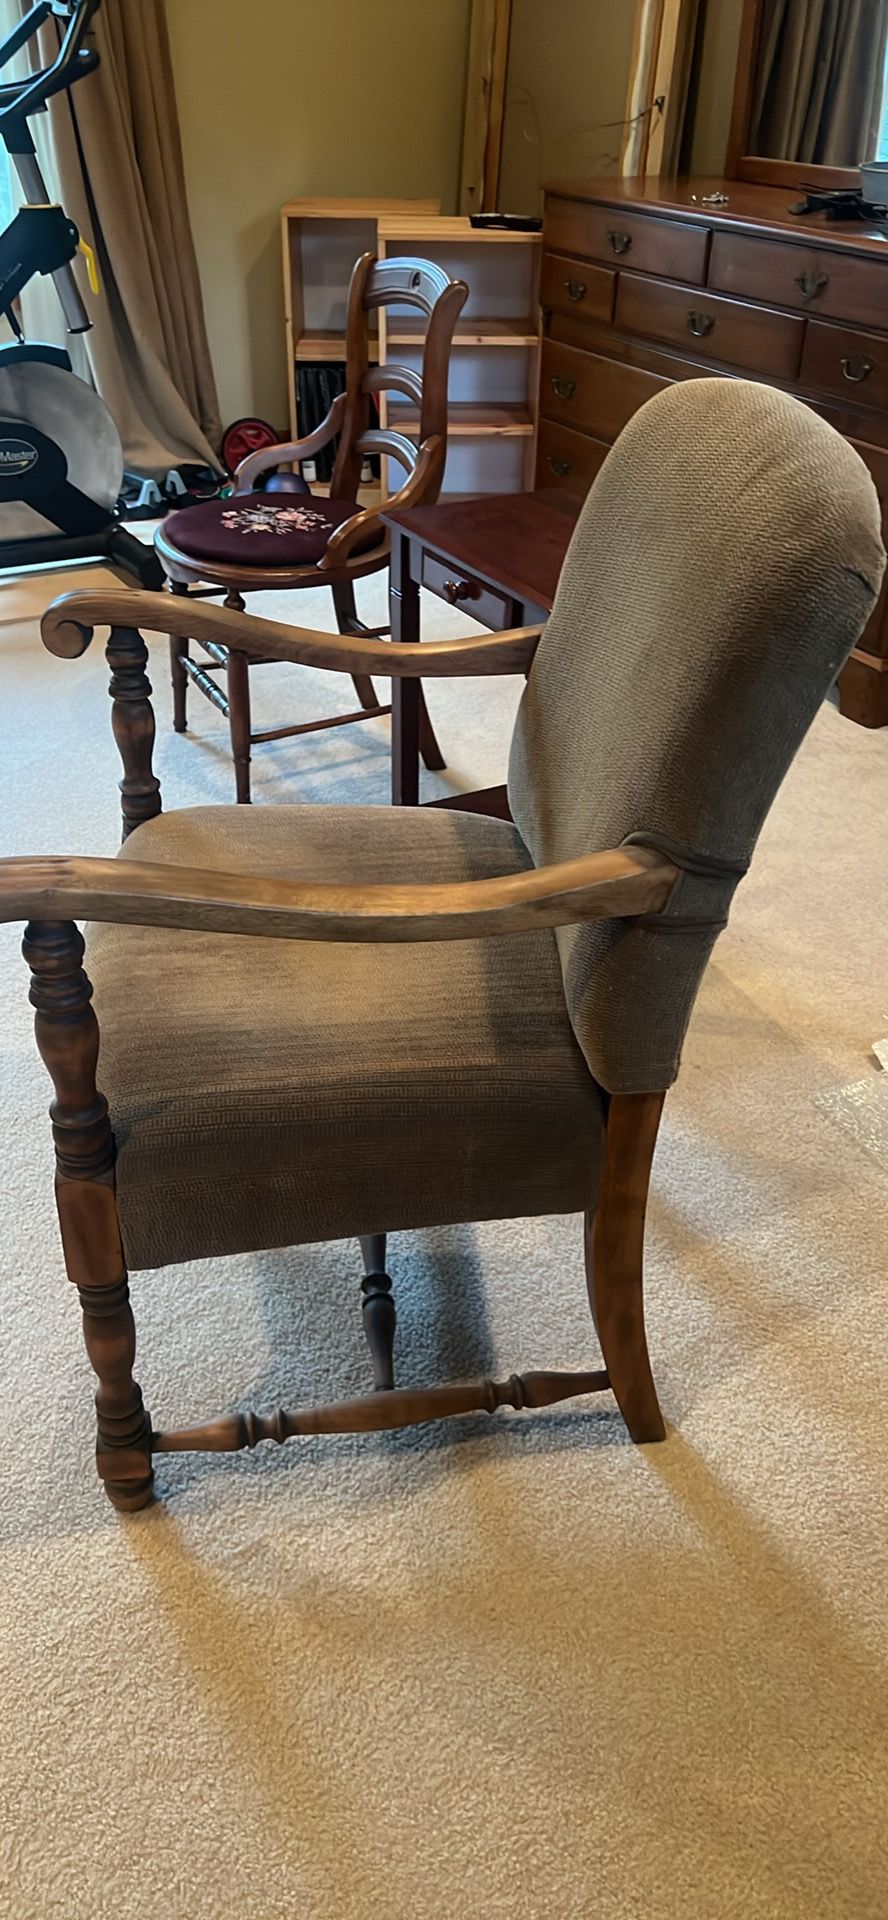 Antique Chair With Arms